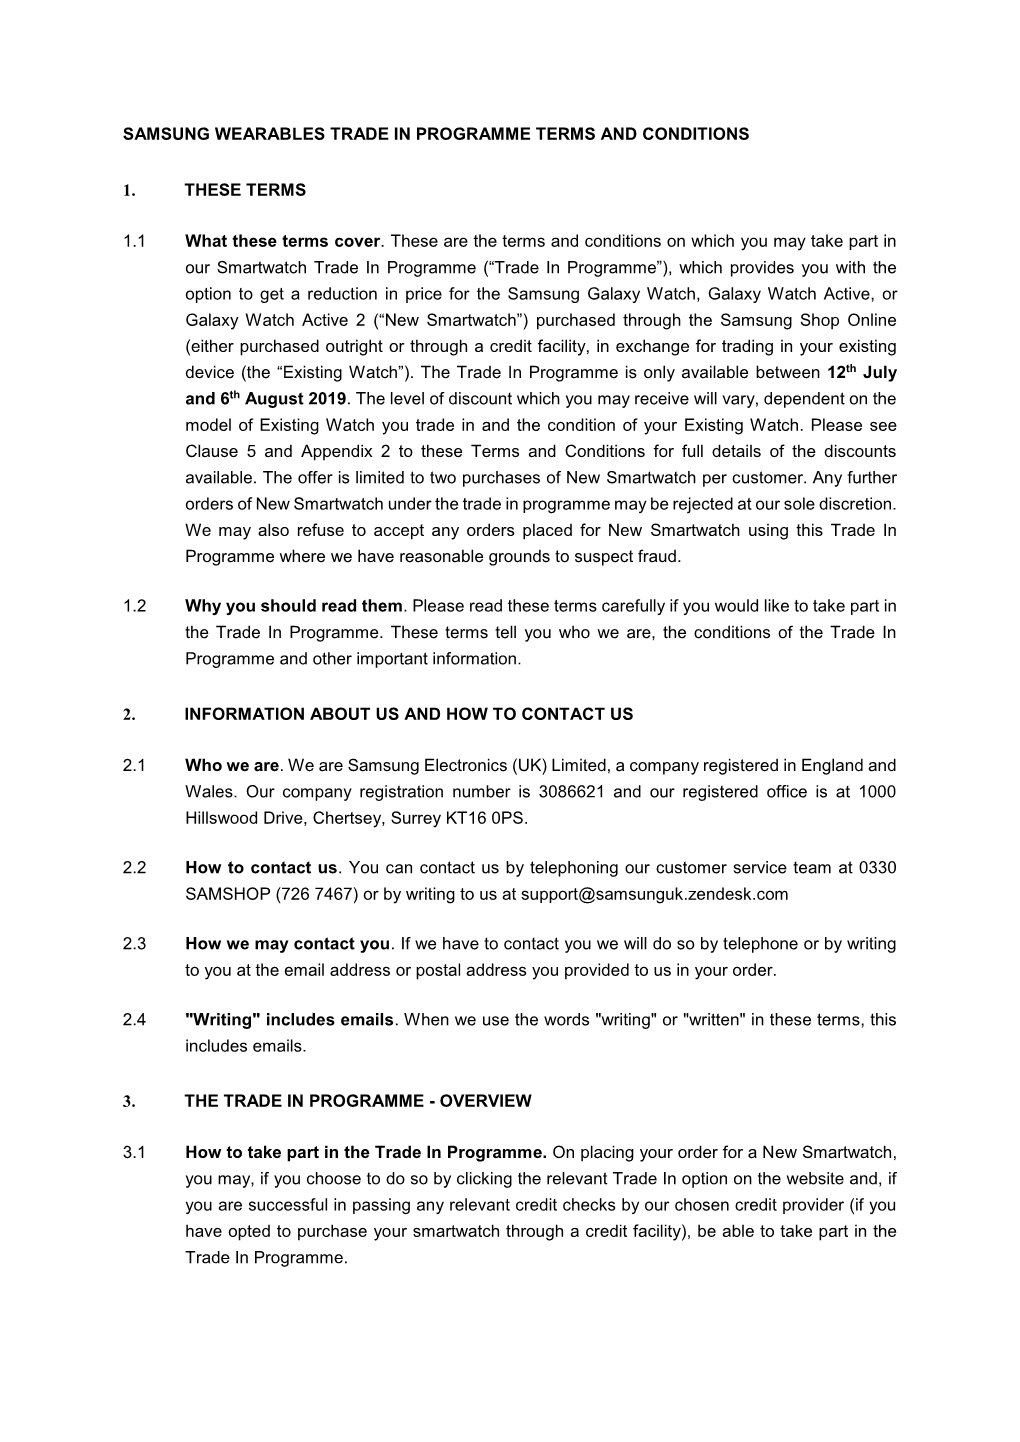 Samsung Wearables Trade in Programme Terms and Conditions